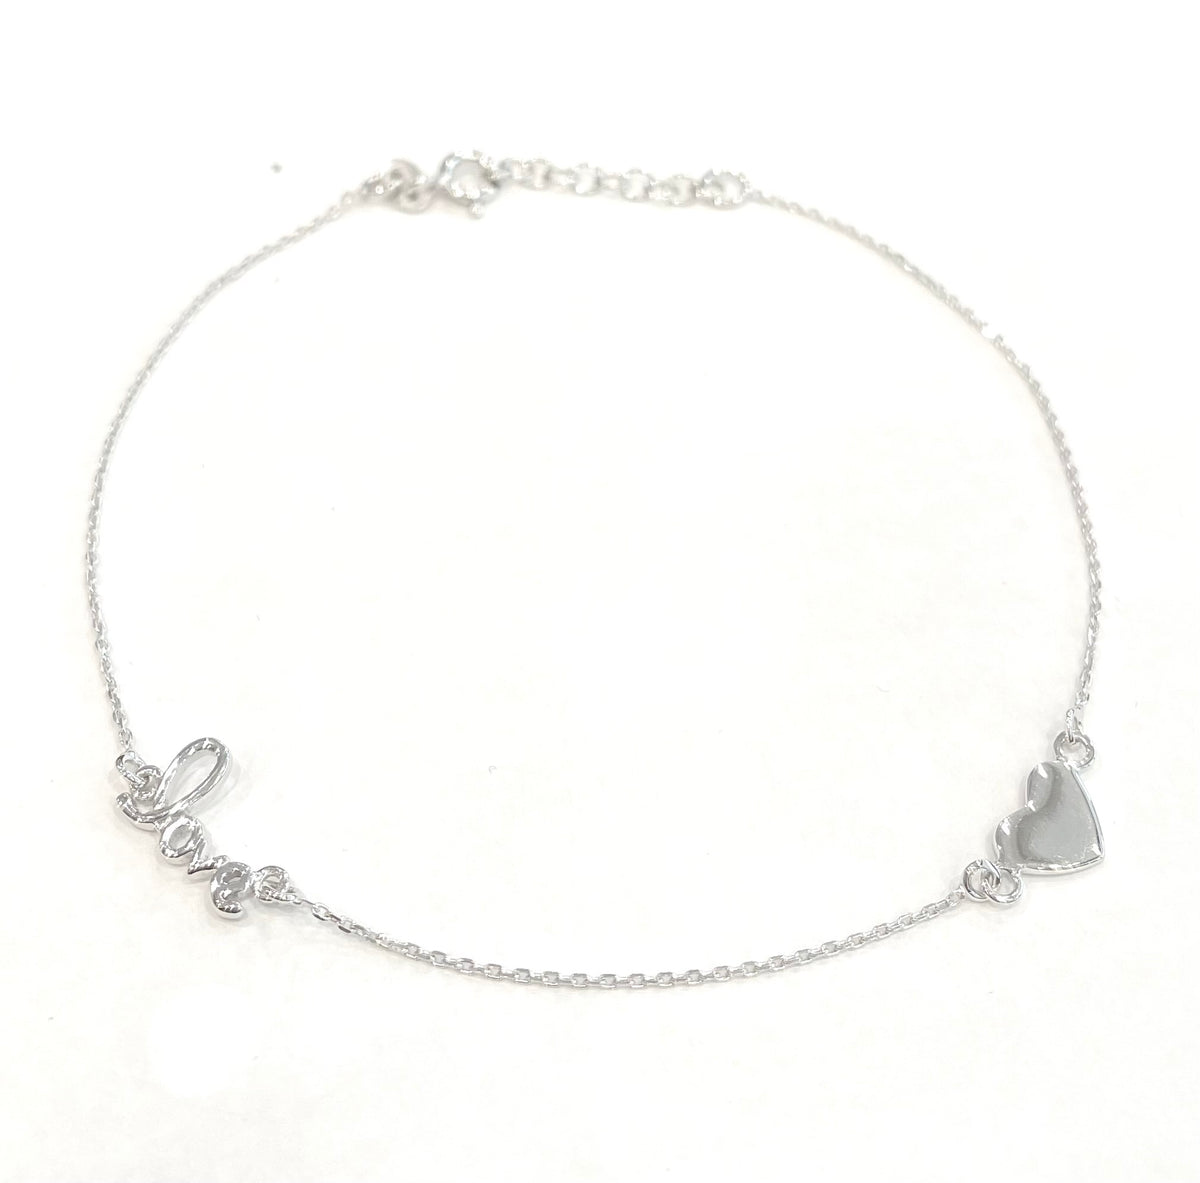 925 Sterling Silver Solid Heart and Love Text Anklet with Spring